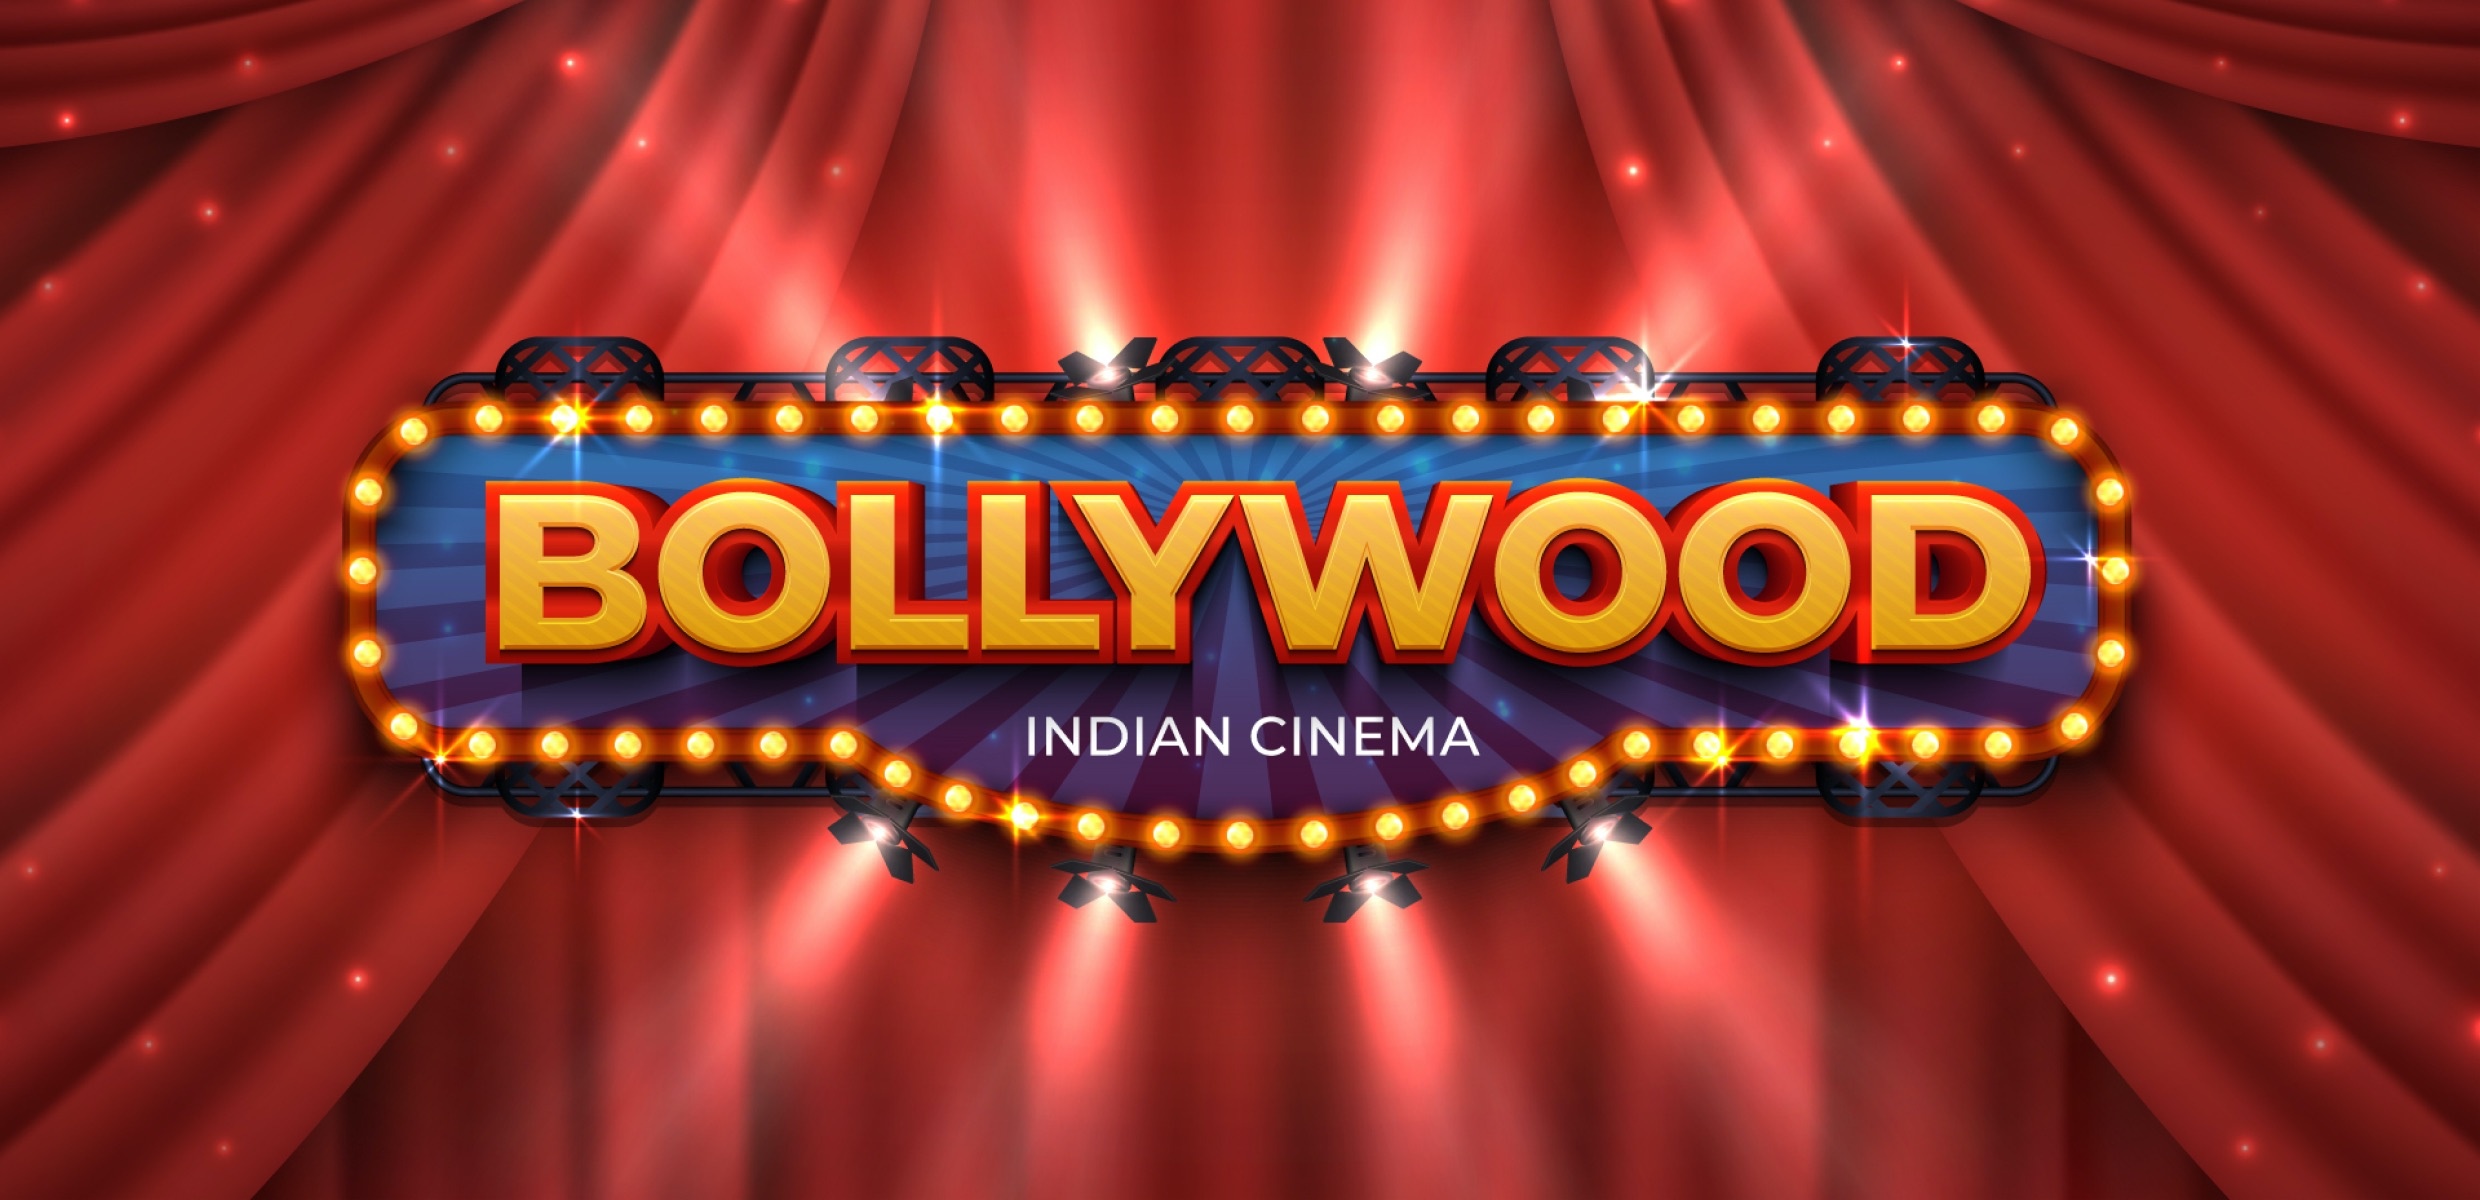 Bollywood movies, Visual effects, Mediocre CGI, Special effects in film, 2480x1200 Dual Screen Desktop